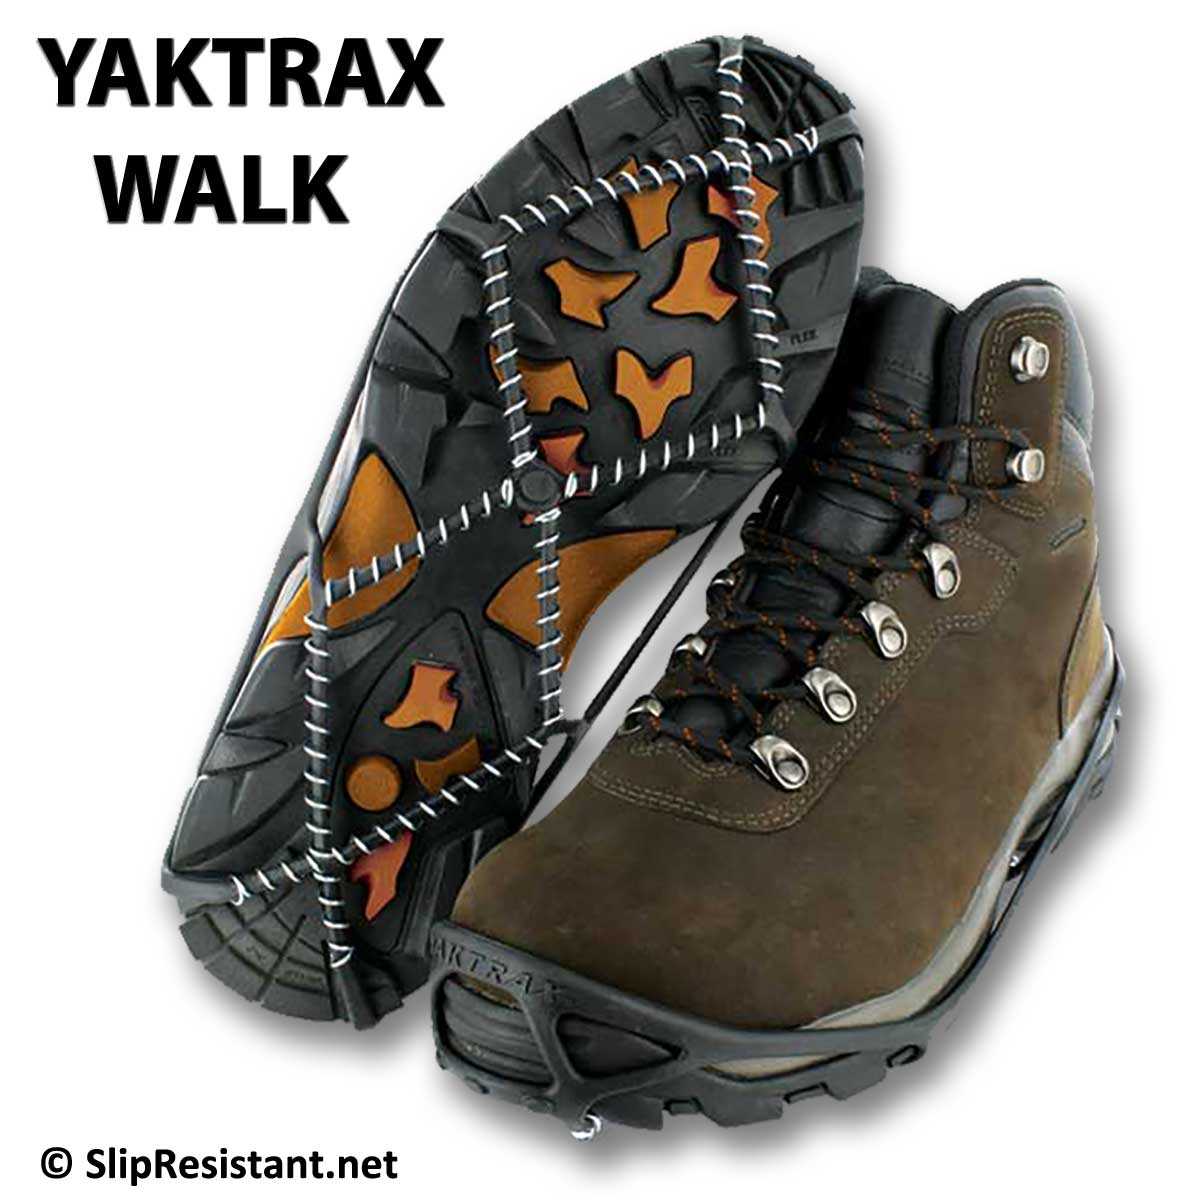 Yaktrax 8608 Walk Traction Cleats for Walking on Snow and Ice 1 Pair for sale online 